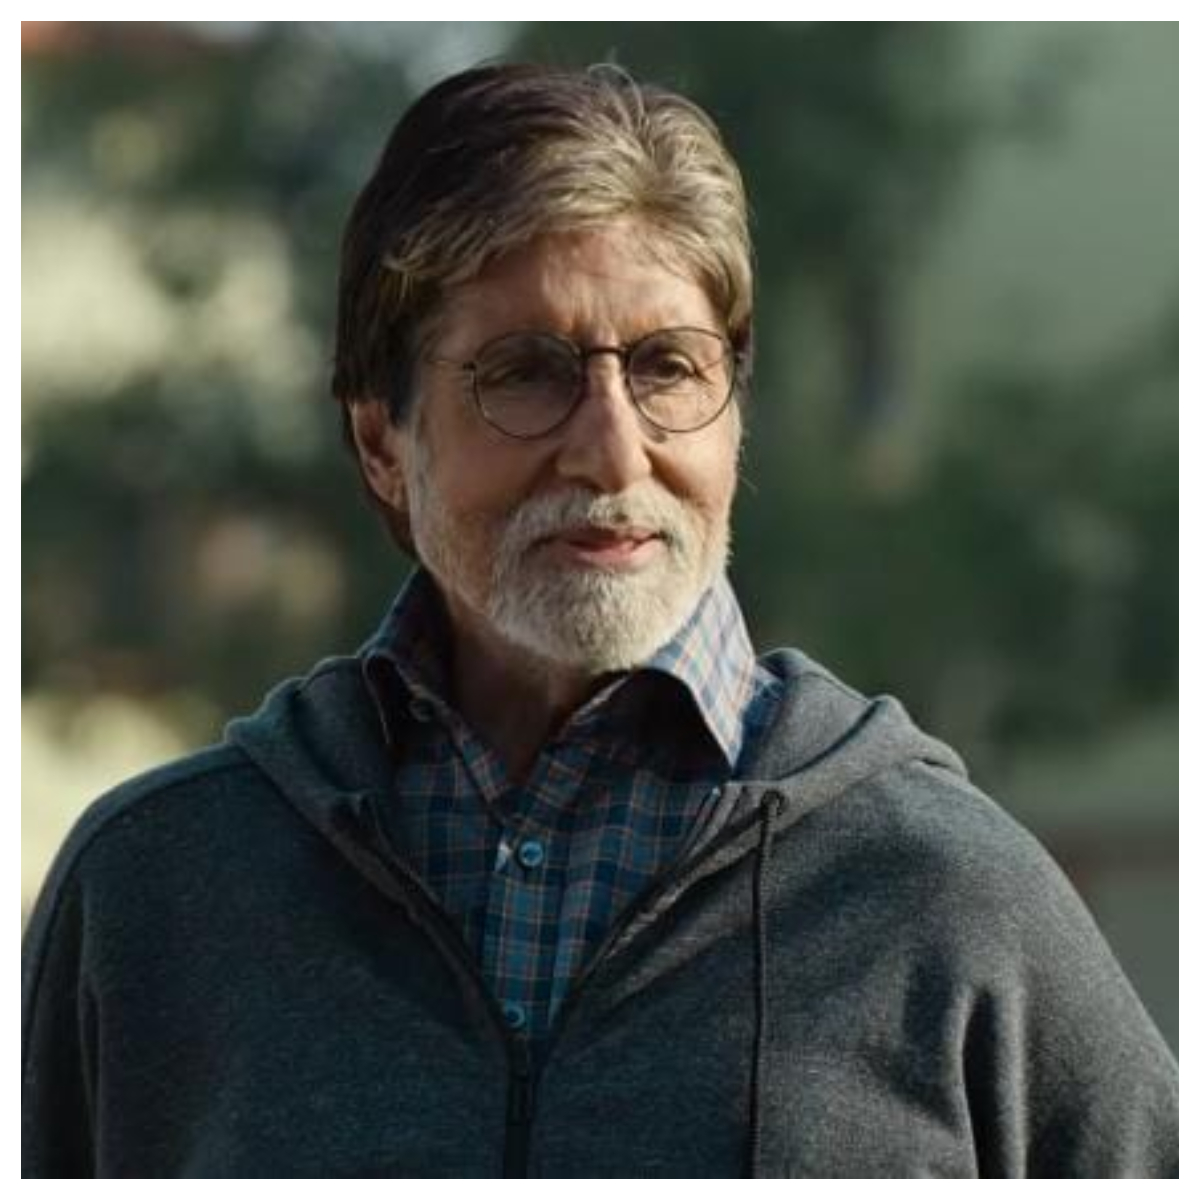 Trade Tutor: Five decades and counting, Amitabh Bachchan continues to be a leading hero and a box office draw